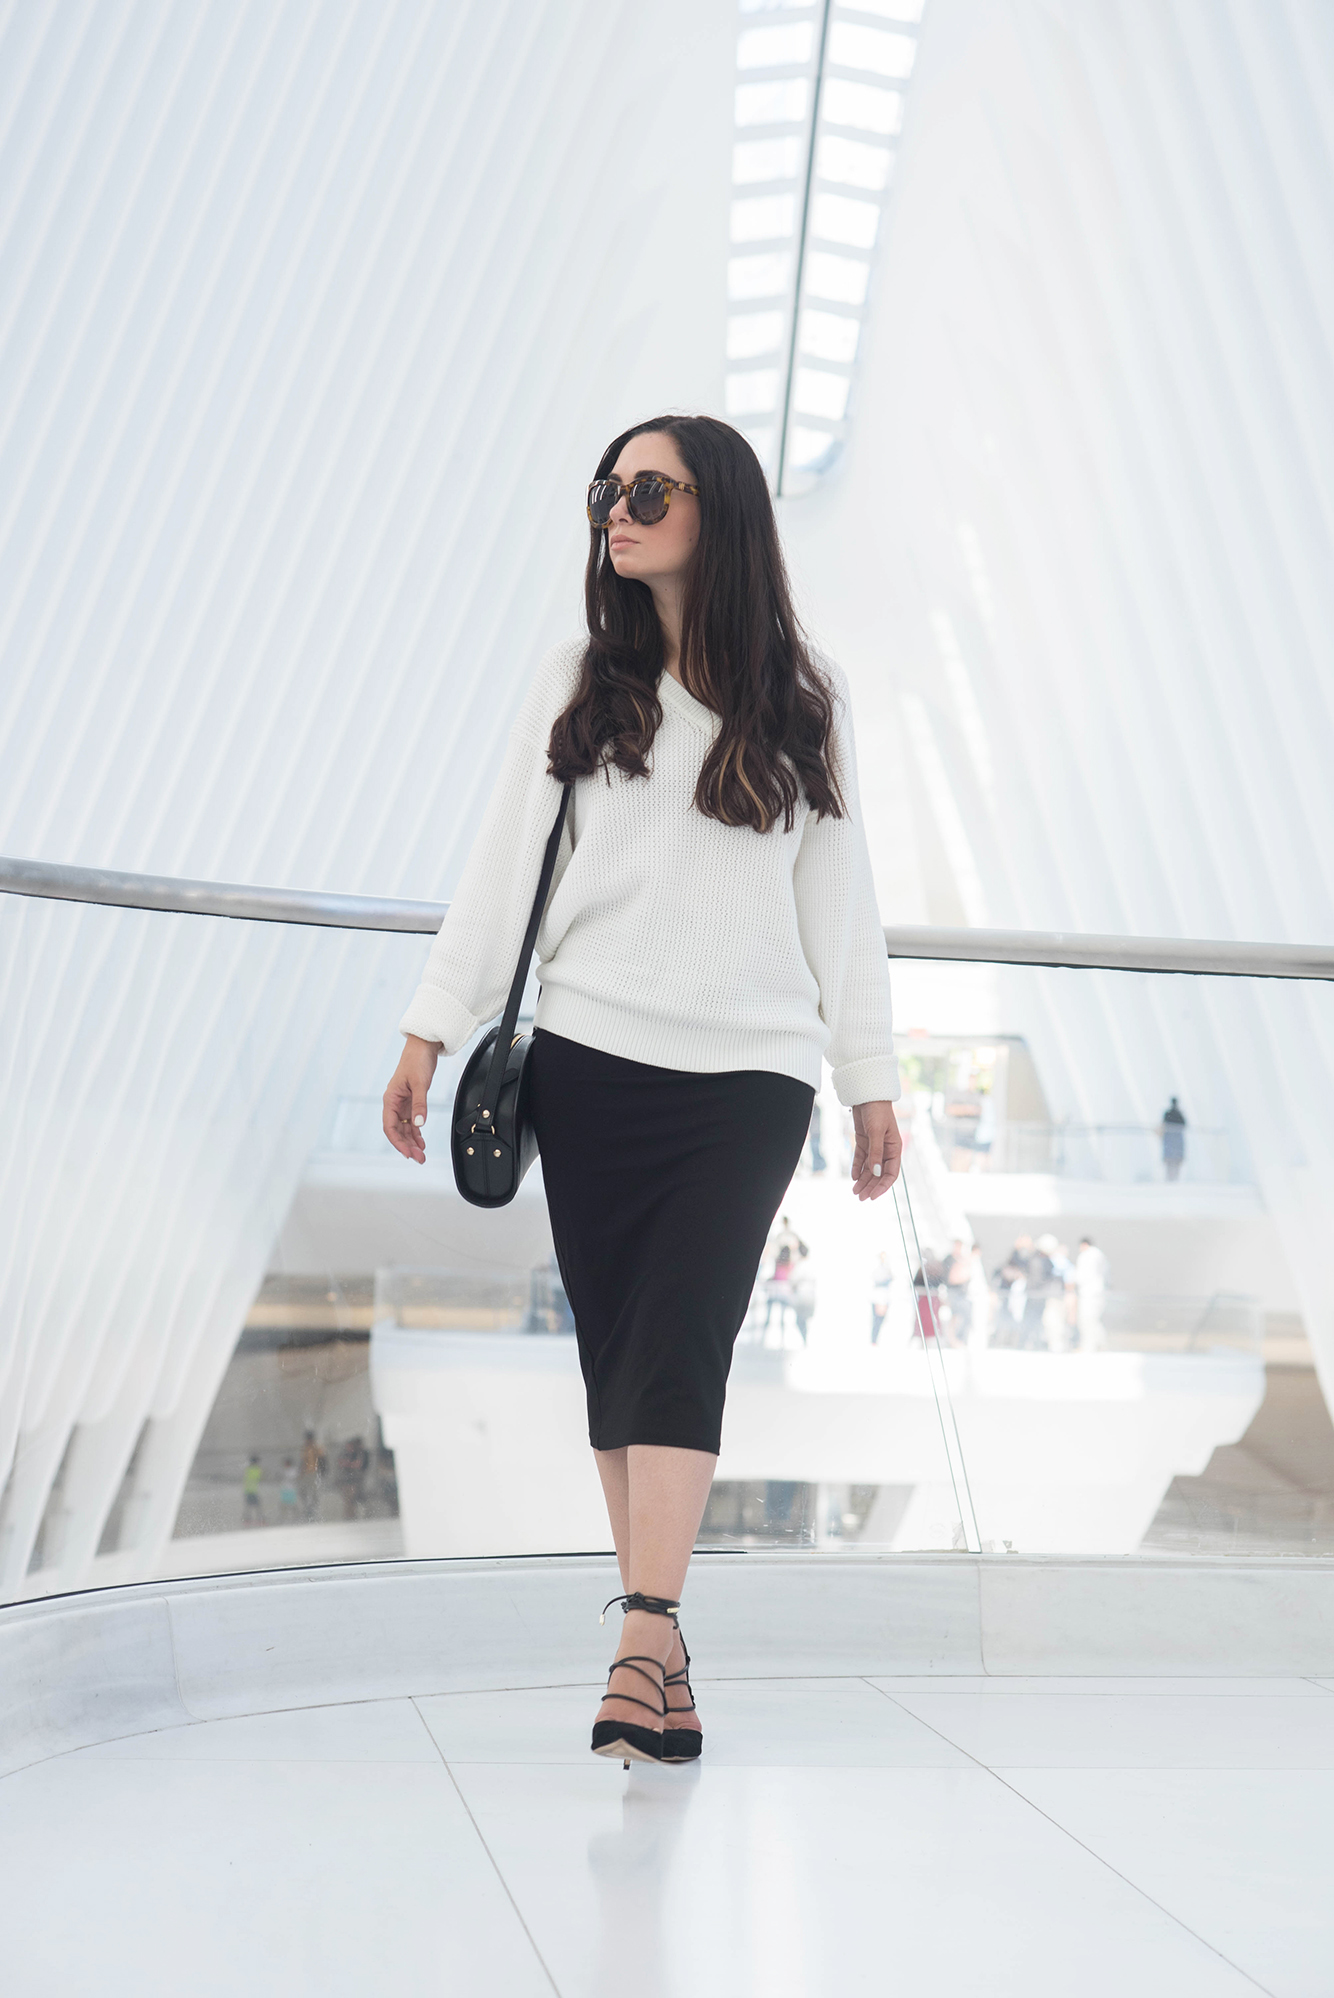 coco-and-vera-best-vancouver-fashion-blog-best-canadian-fashion-blog-top-blogger-nyc-street-style-uniqlo-sweater-le-chateau-skirt-anine-bing-sunglasses-apc-bag-sam-edelman-heels-copy